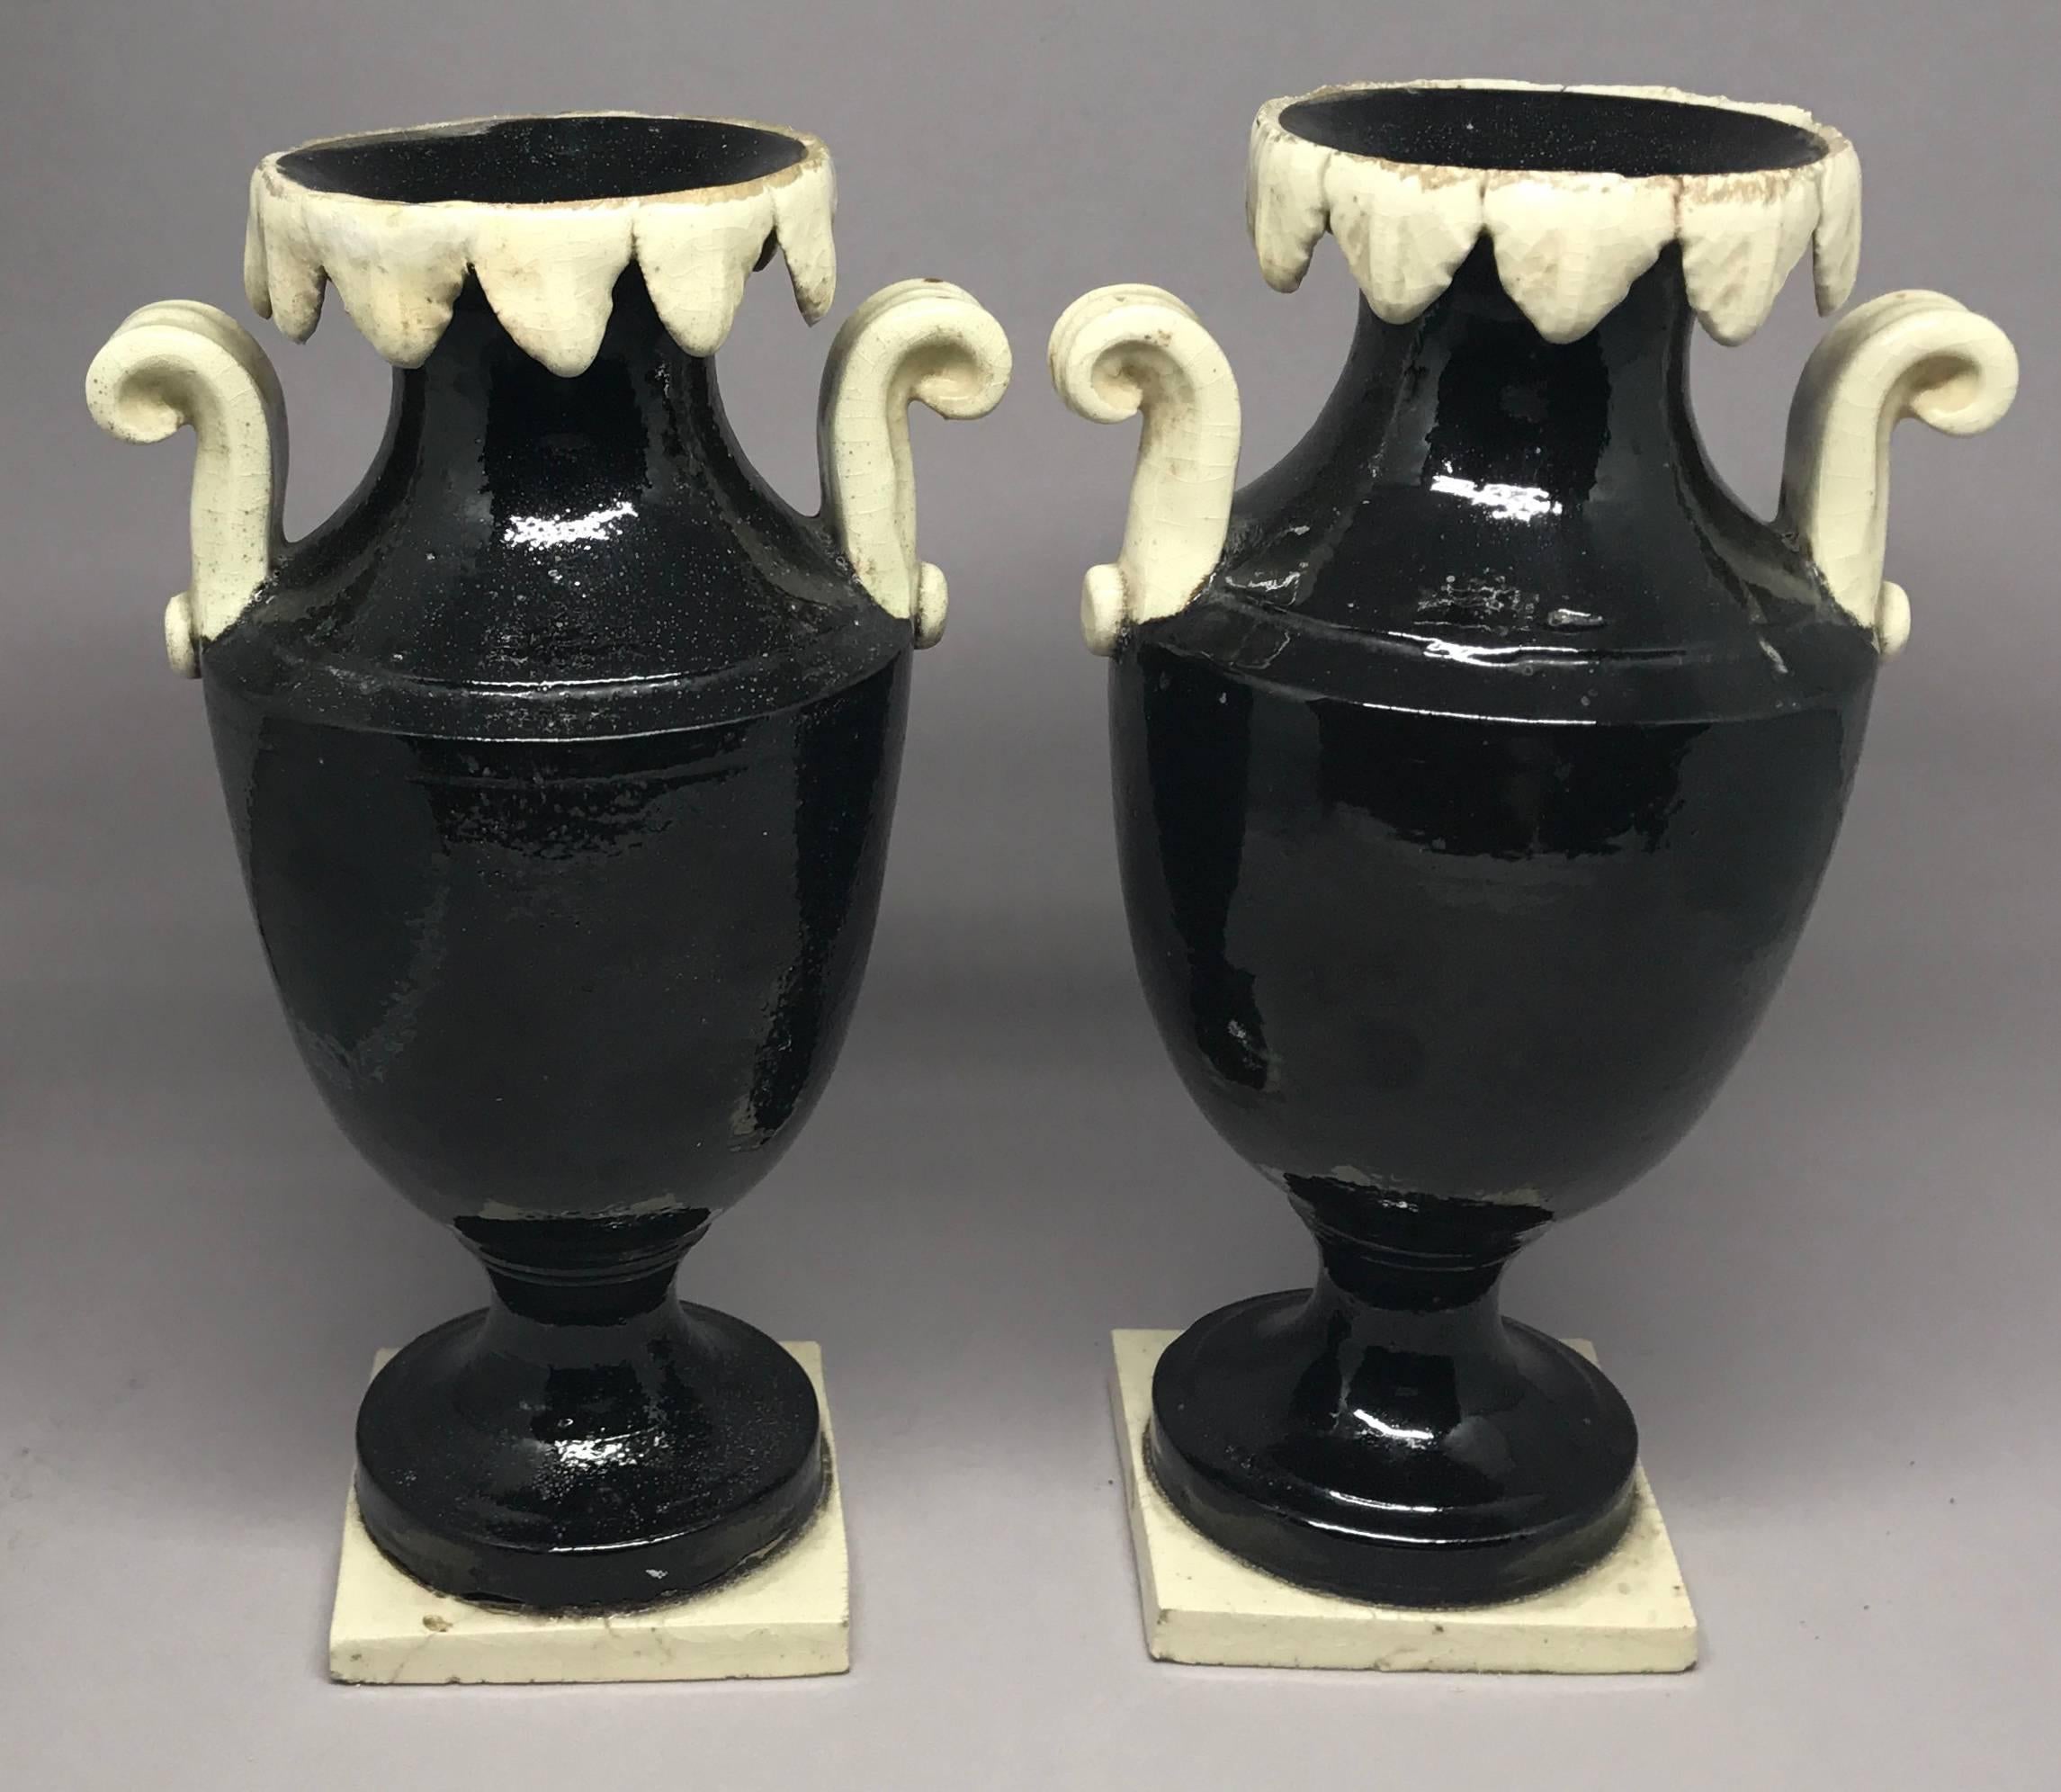 Pair of neoclassical black and white Giustiniani urns with contrasting foliate rims and scrolled handles on low plinths. Italy, circa 1780s.
Dimensions: 7.75